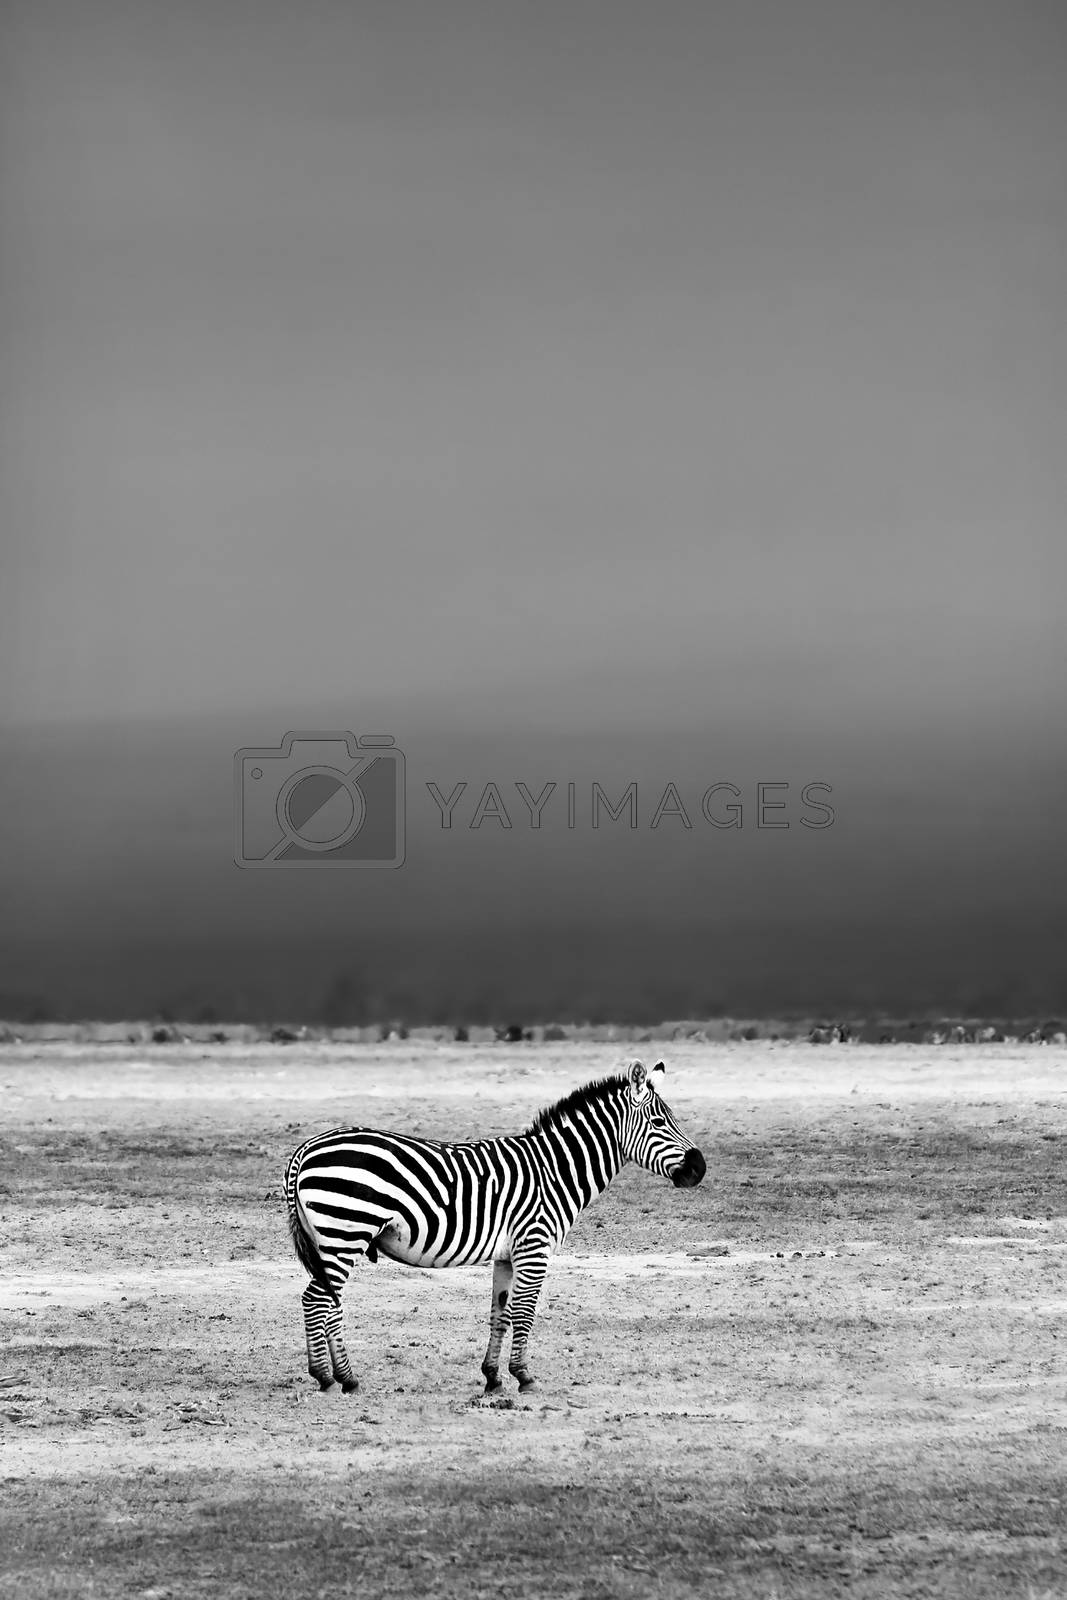 Royalty free image of African Wild Zebra by Anna_Omelchenko